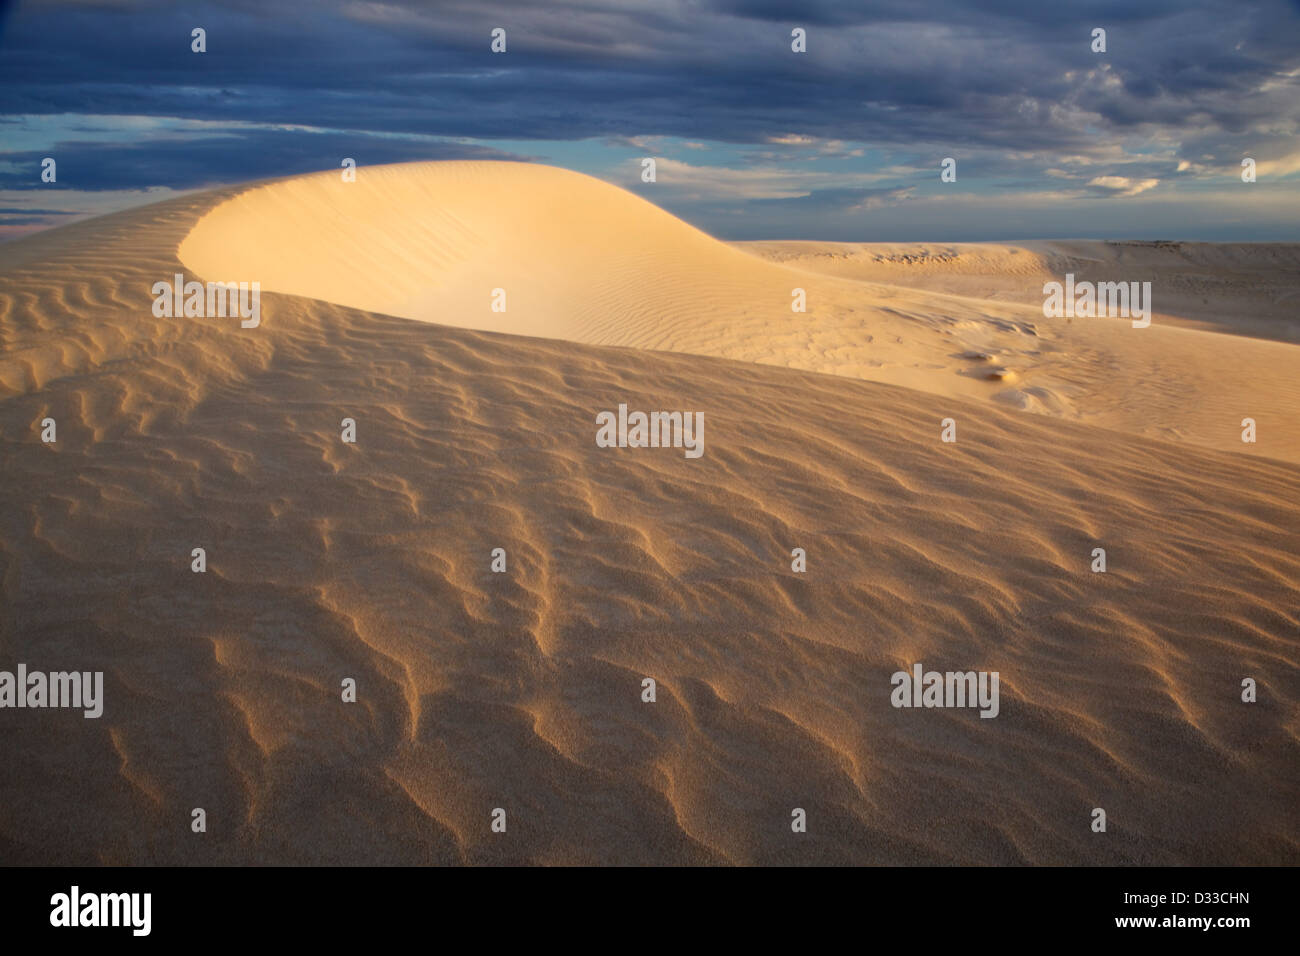 A landscape picture in Australia. Sand dunes near the town of Fowlers Bay in the South Australian Outback. Stock Photo